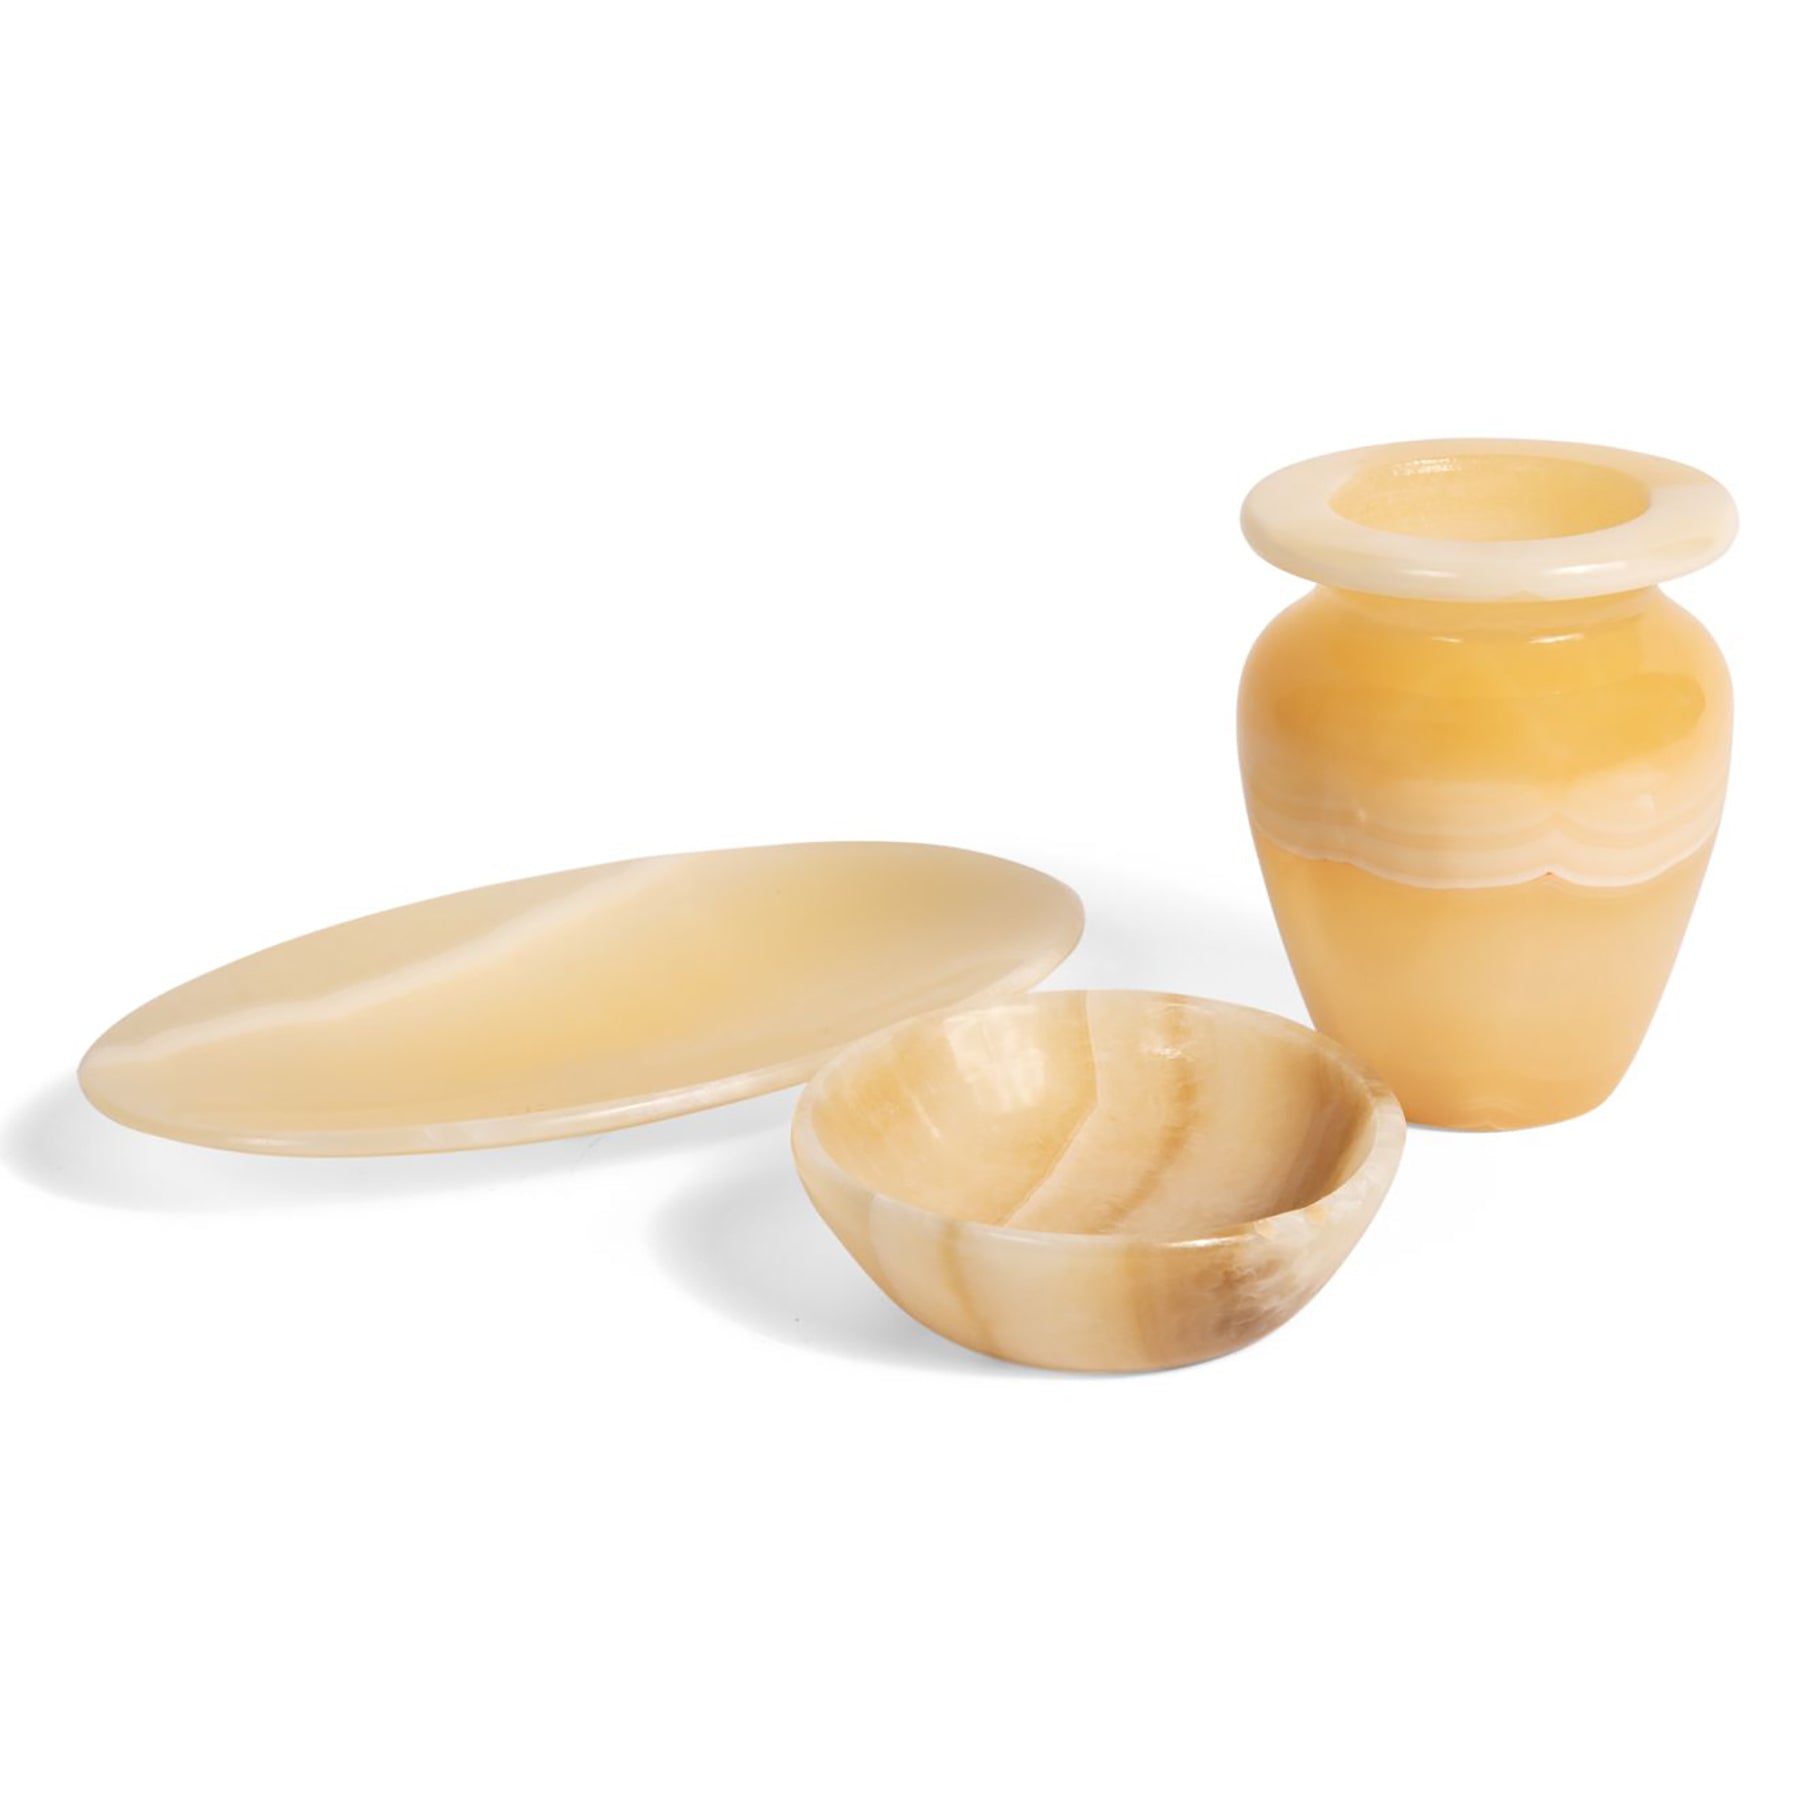 Egyptian Alabaster Dish | Getty Store